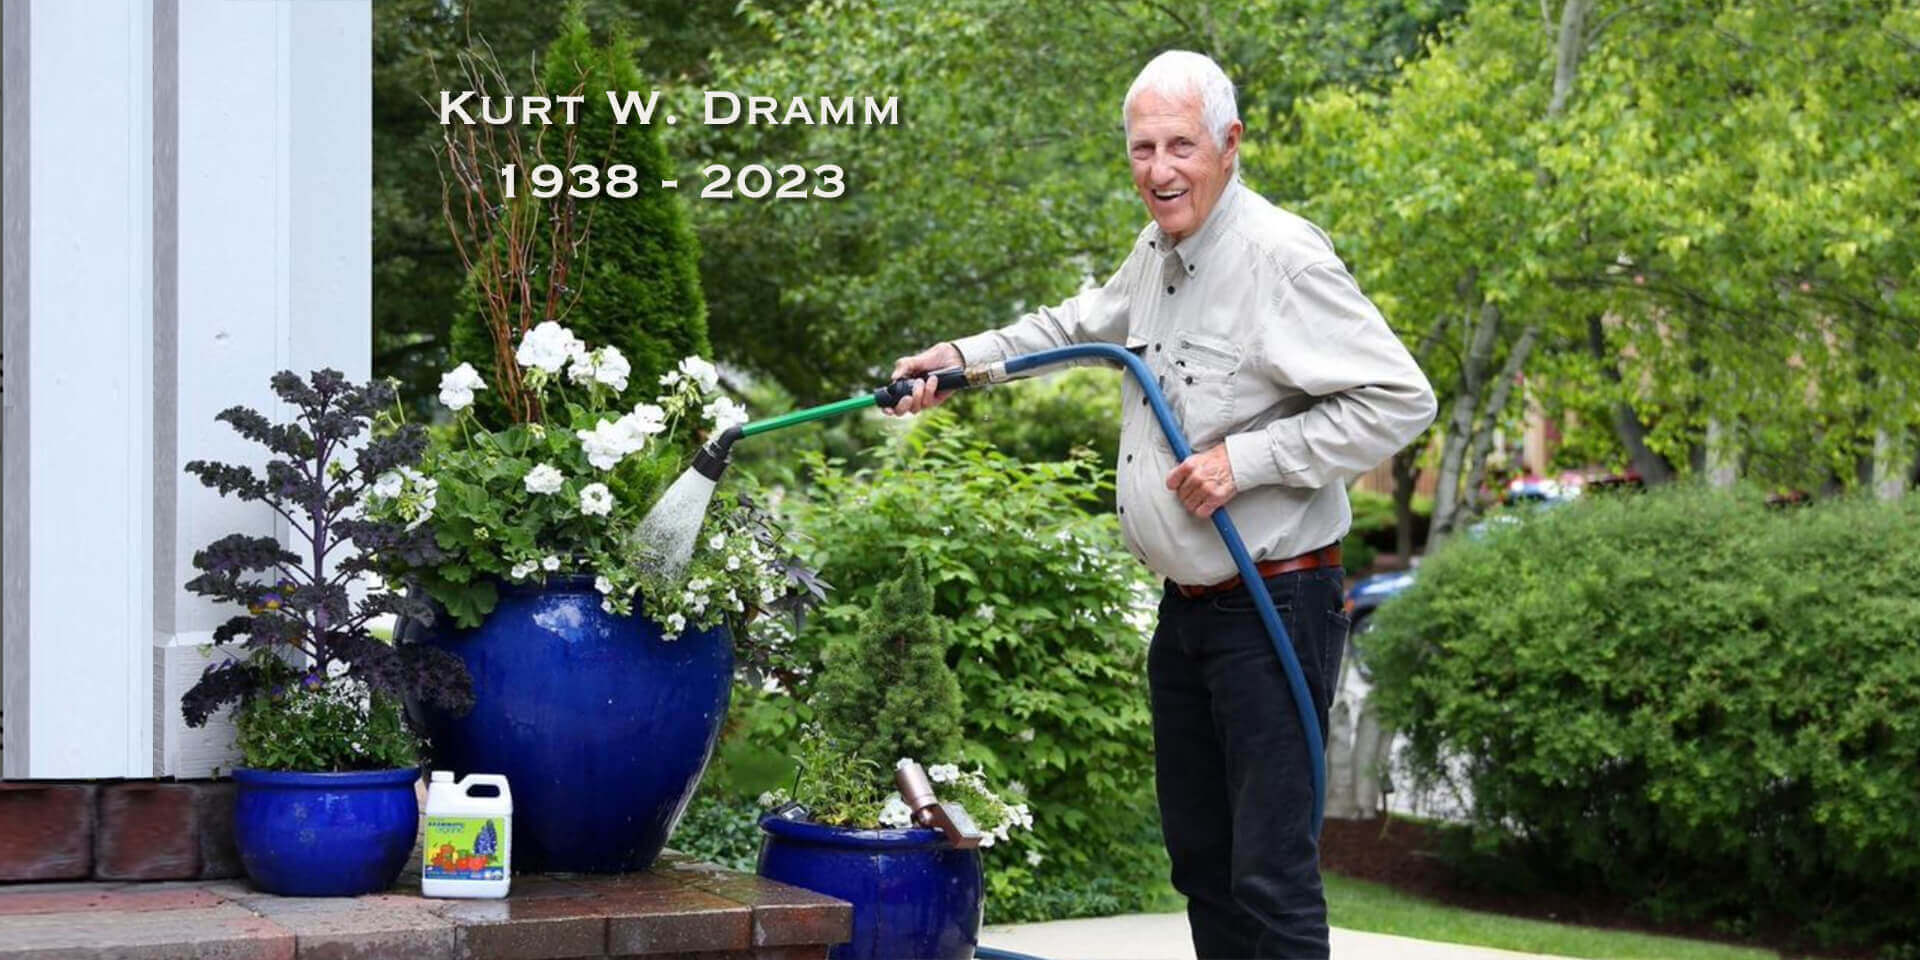 Horticulture Industry Mourns the Passing of Kurt W. Dramm